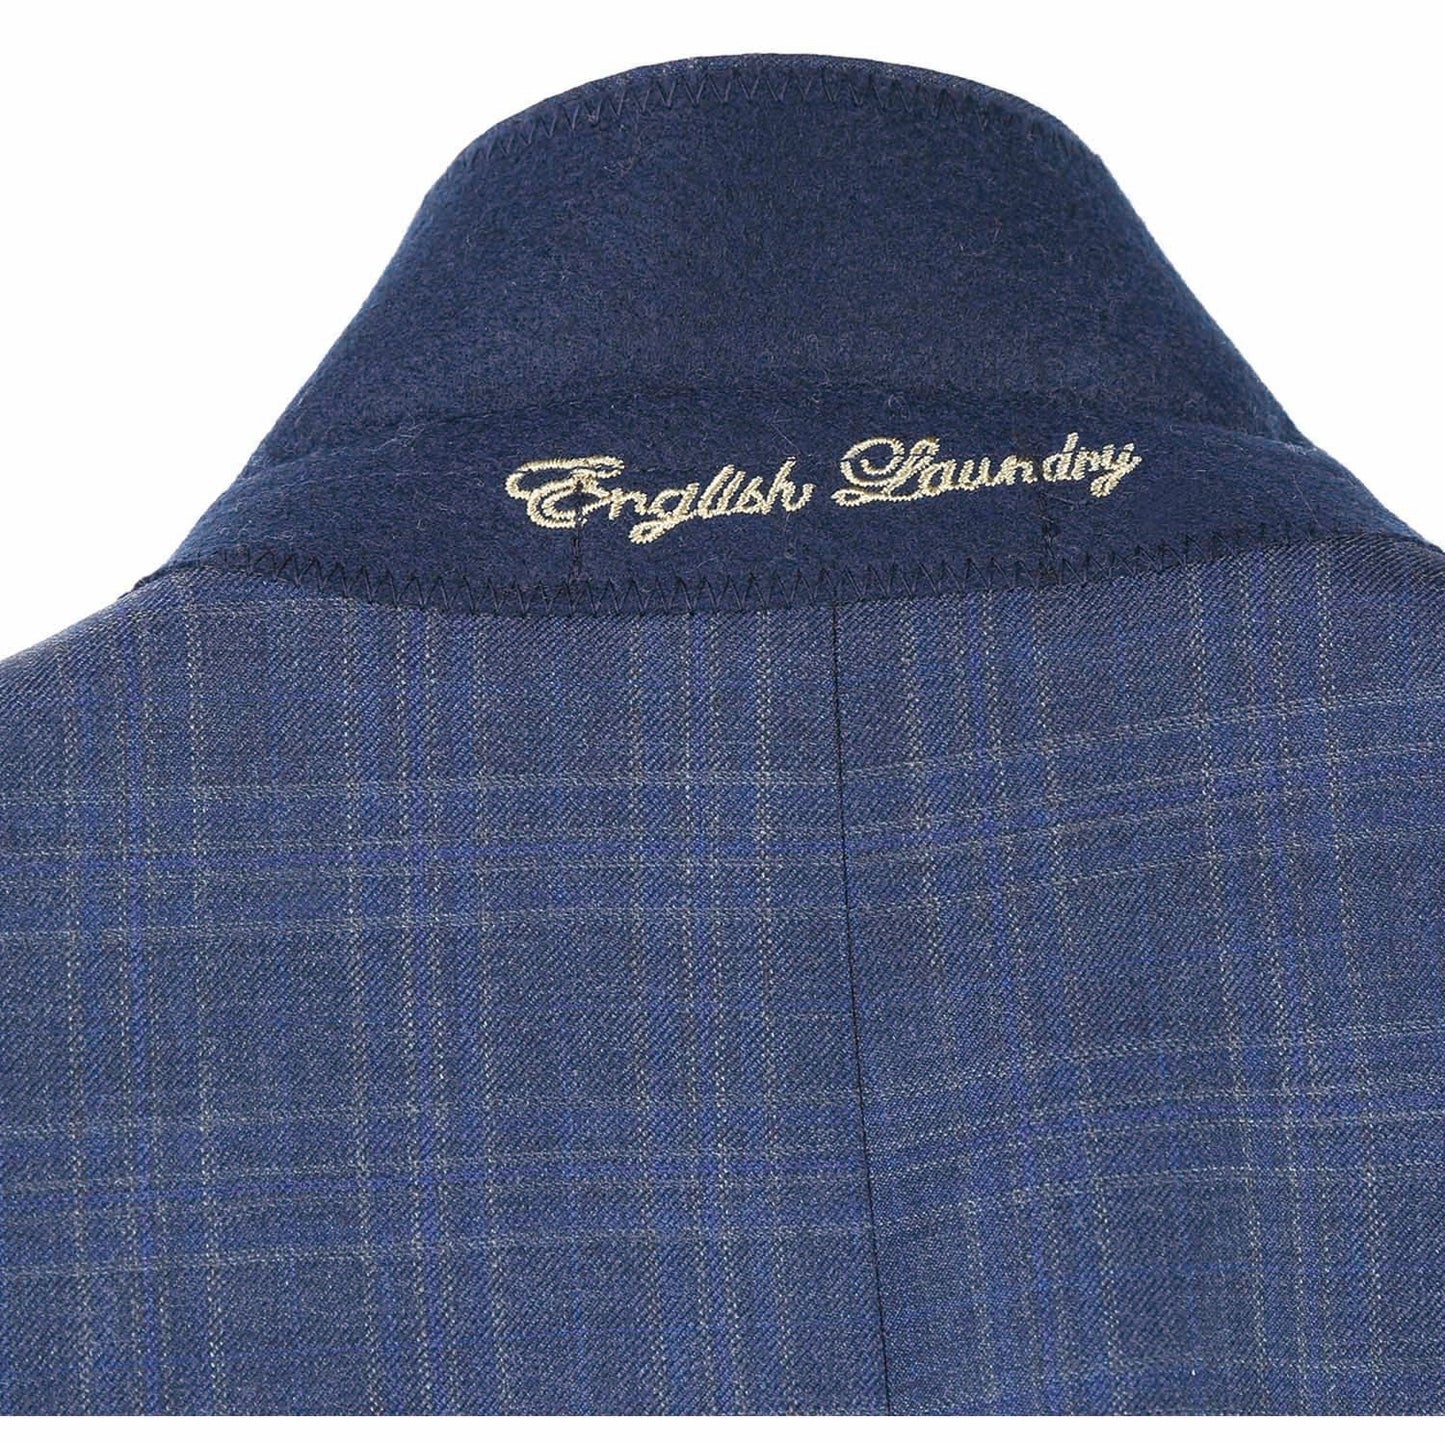 EL82-66-415 Gray and Blue Plaid Wool Suit